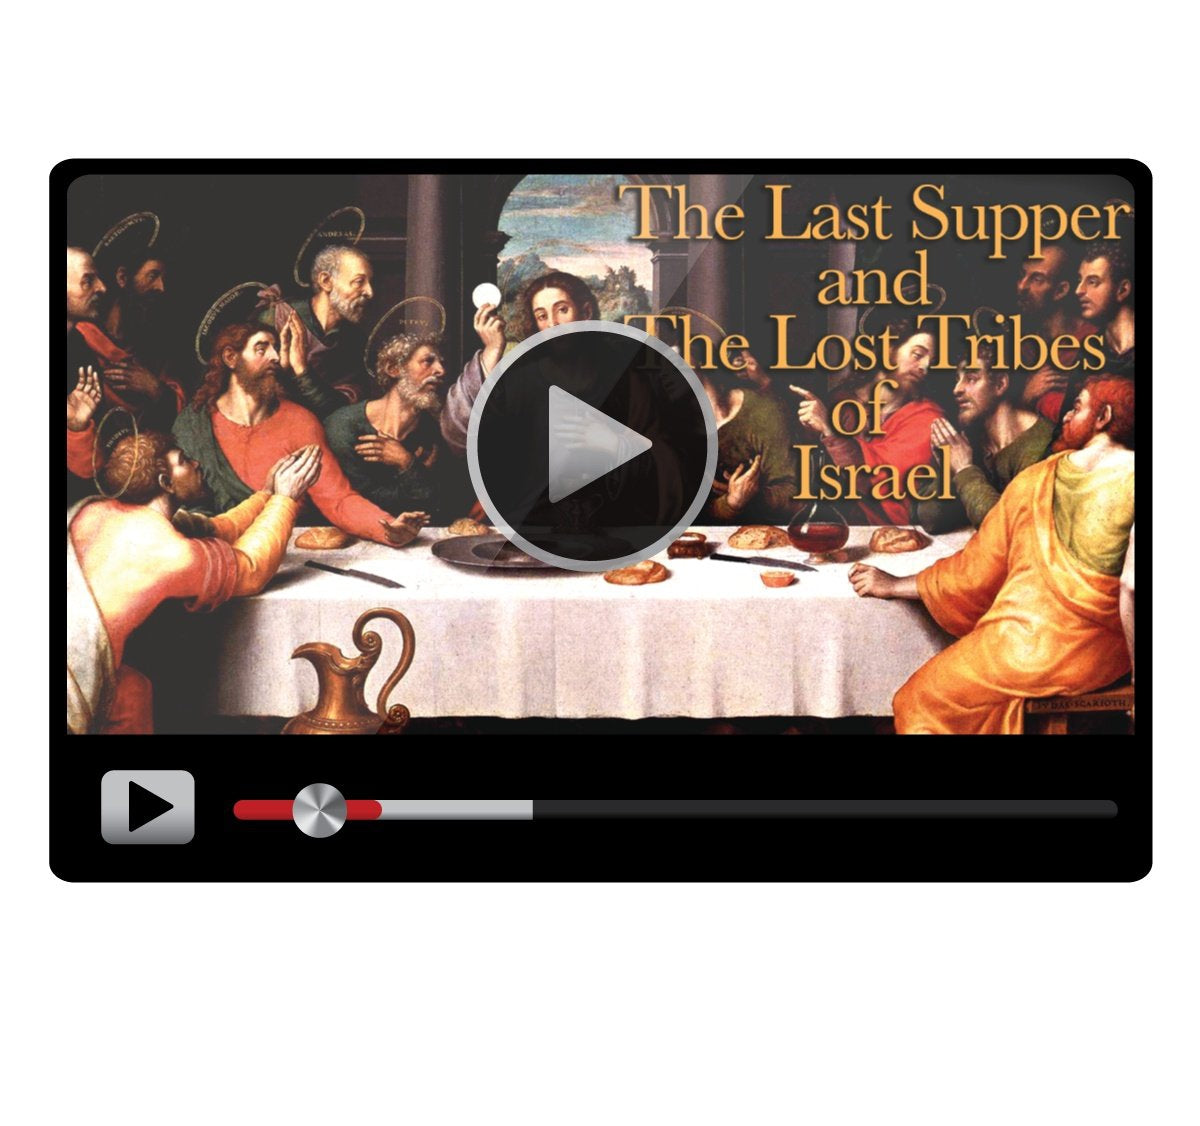 The prophets in the Old Testament foretold of the restoration of the Lost Tribes of Israel.  Learn how Jesus accomplishes this at the Last Supper (CD).